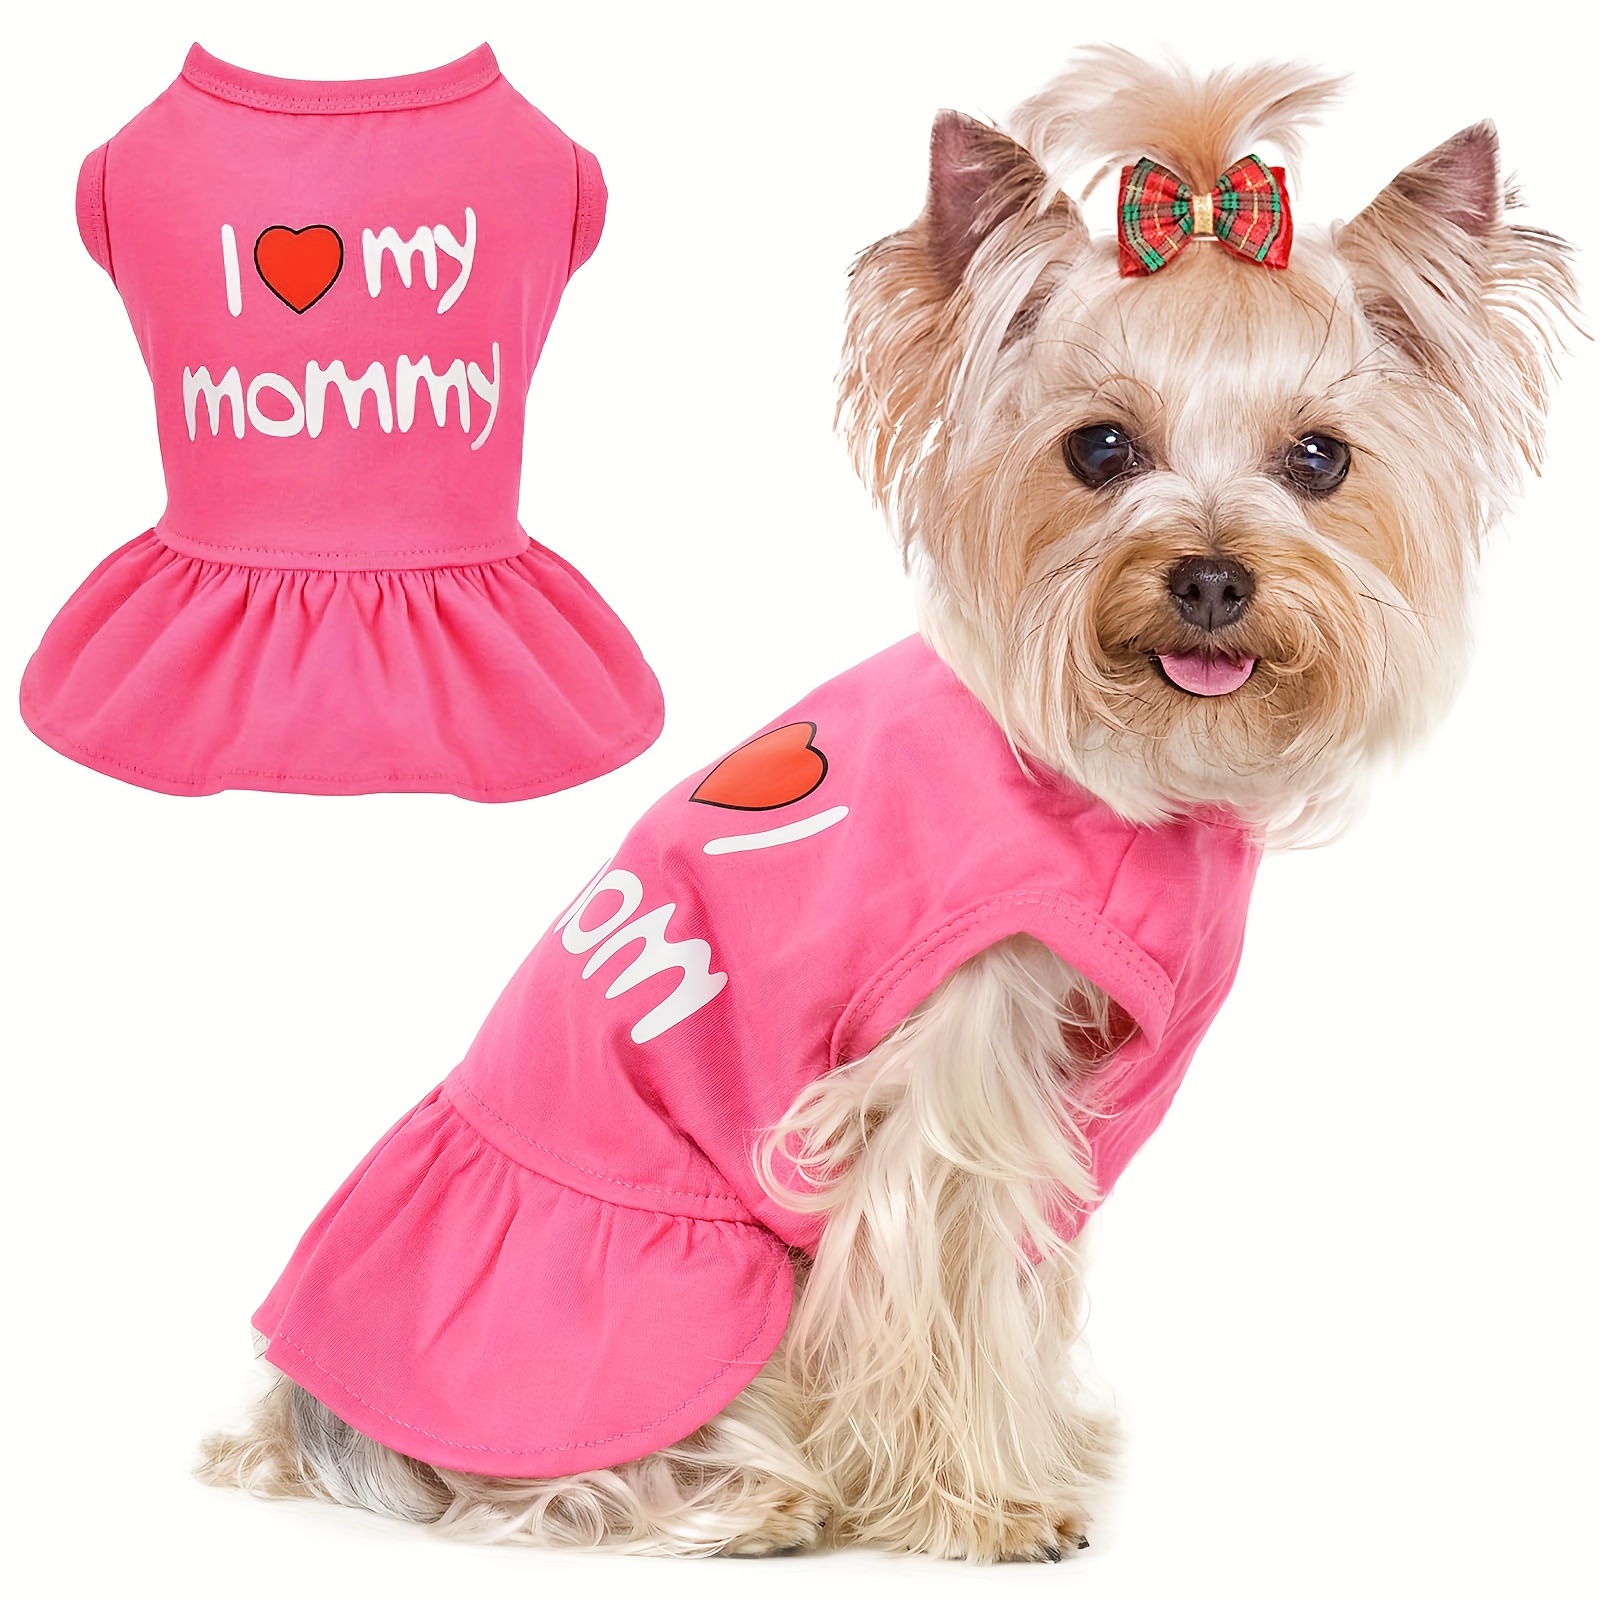 

Dog Dress, Dog Clothes For Small Dogs Girl, Cute "i Love My Mommy" Pink Dog Dresses, Breathable Pet Spring Summer Clothes Puppy Cat Outfits For Valentines Day